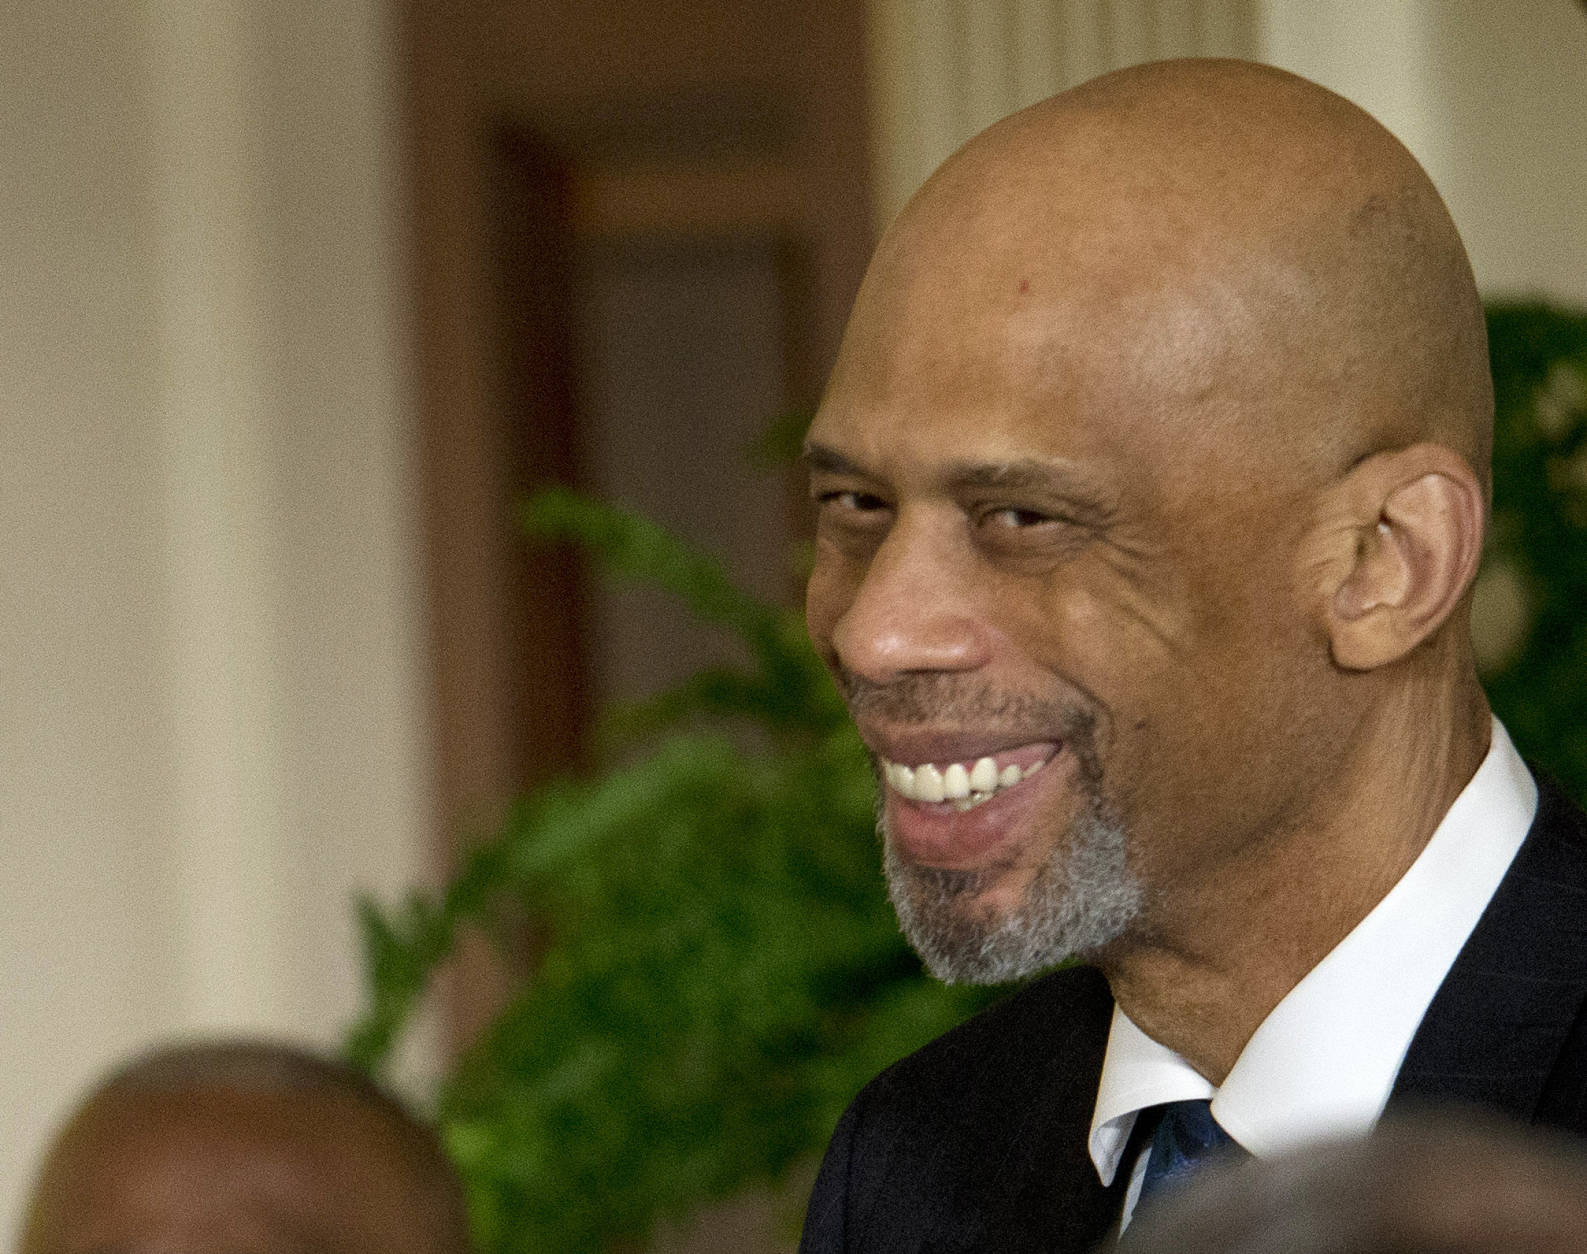 FILE - In this Jan. 30, 2015 file photo, former NBA basketball player Kareem Abdul Jabbar is seen in the East Room of the White House in Washington. President Barack Obama is honoring Abdul-Jabbar, Cicely Tyson, Tom Hanks, Michael Jordan and others with the Presidential Medal of Freedom, the nation's highest civilian honor.  (AP Photo/Pablo Martinez Monsivais, File)